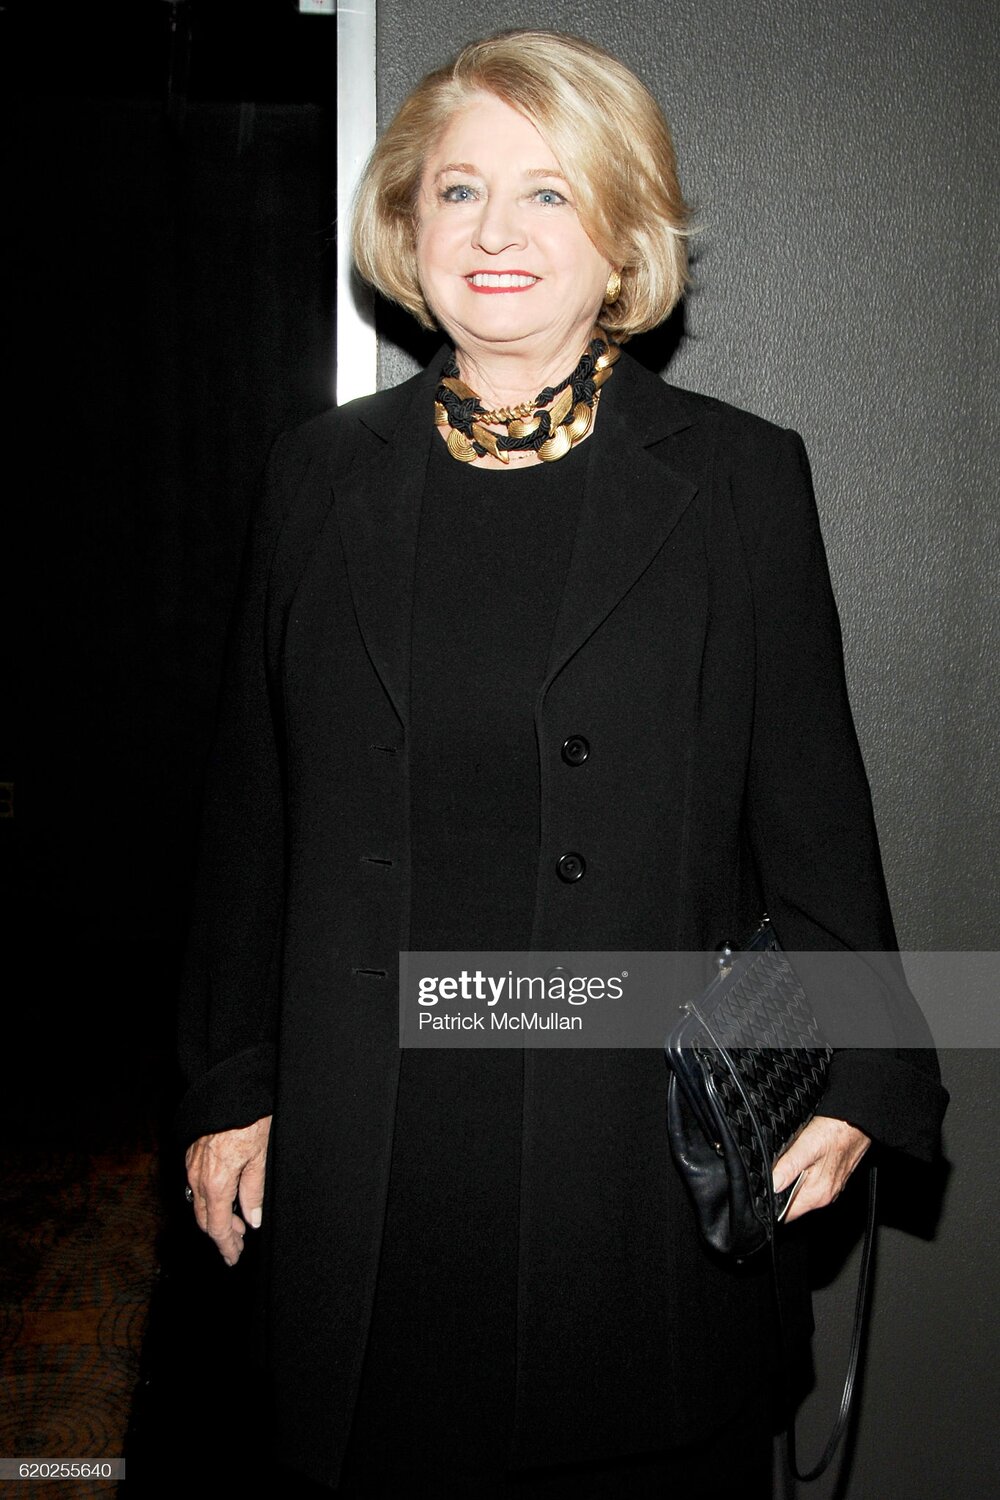 Shirley Lord Rosenthal attends THE WEEK and SIR HAROLD EVANS Present %22The Media & The Presidency%22 at Rainbow Room on November 10, 2008 in New York City. (Photo by NICK HUNT .jpg